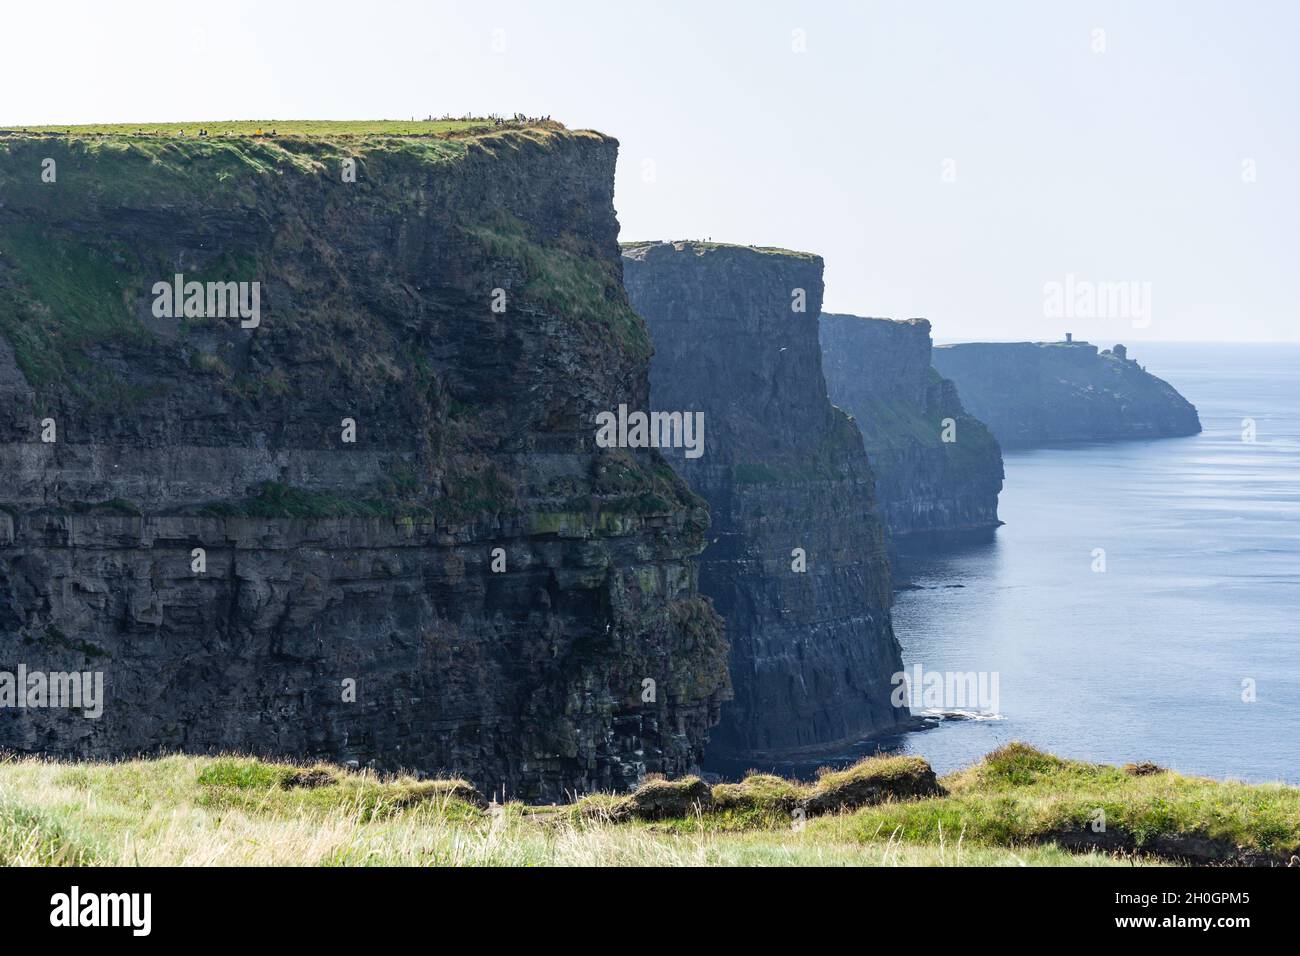 Cliffs of Moher (Aillte an Mhothair), Lahinch, County Clare, Republik Irland Stockfoto